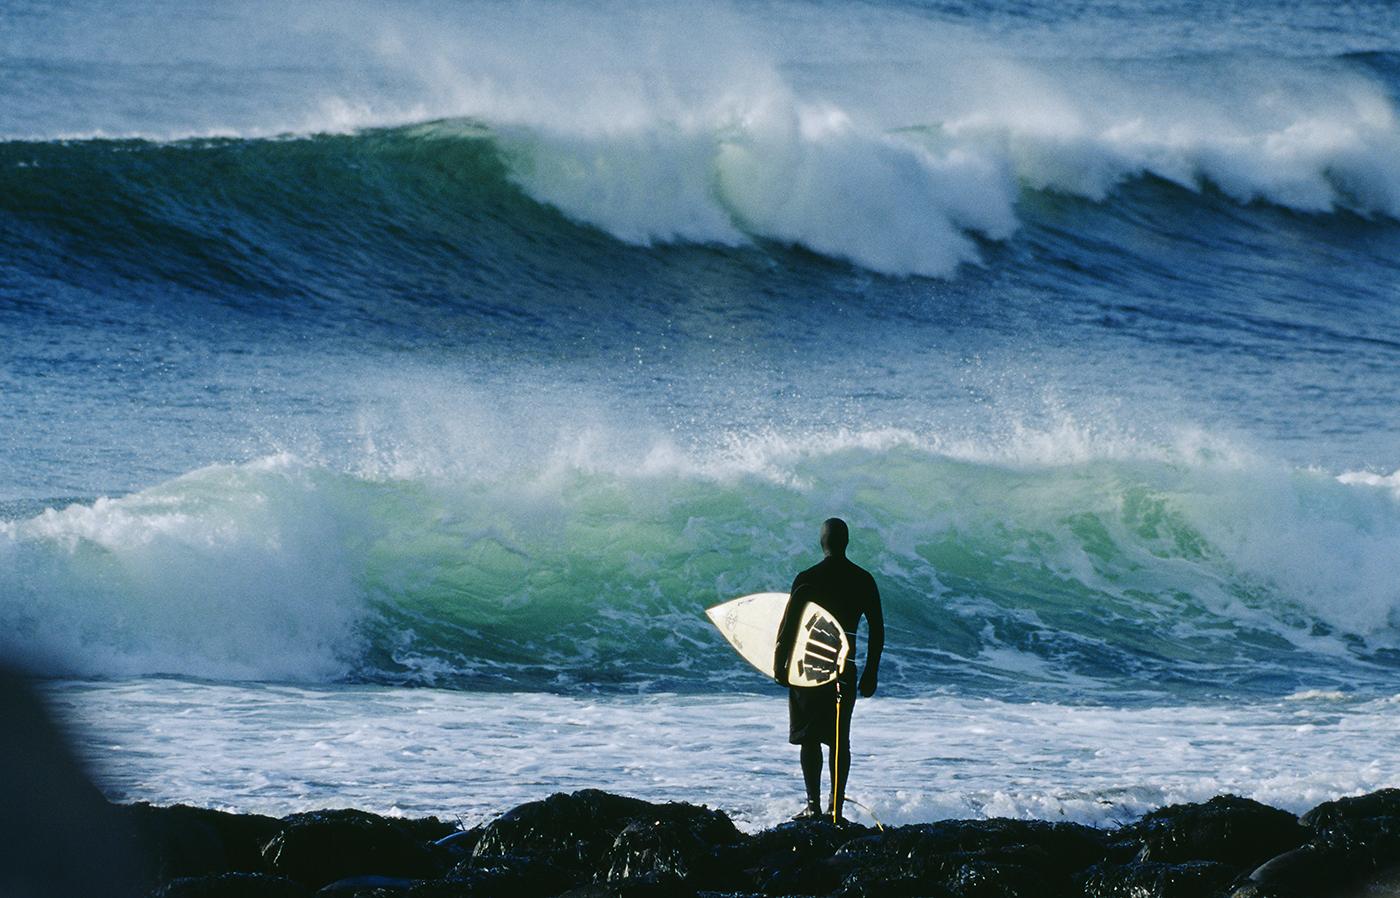                             A surfer observes the waves at Unstad. &#x201C;There are these huge mountains that come straight out of the ocean,&#x201D; another surfer says. &#x201C;You forget that you&#x2019;re even going surfing&#x201D;